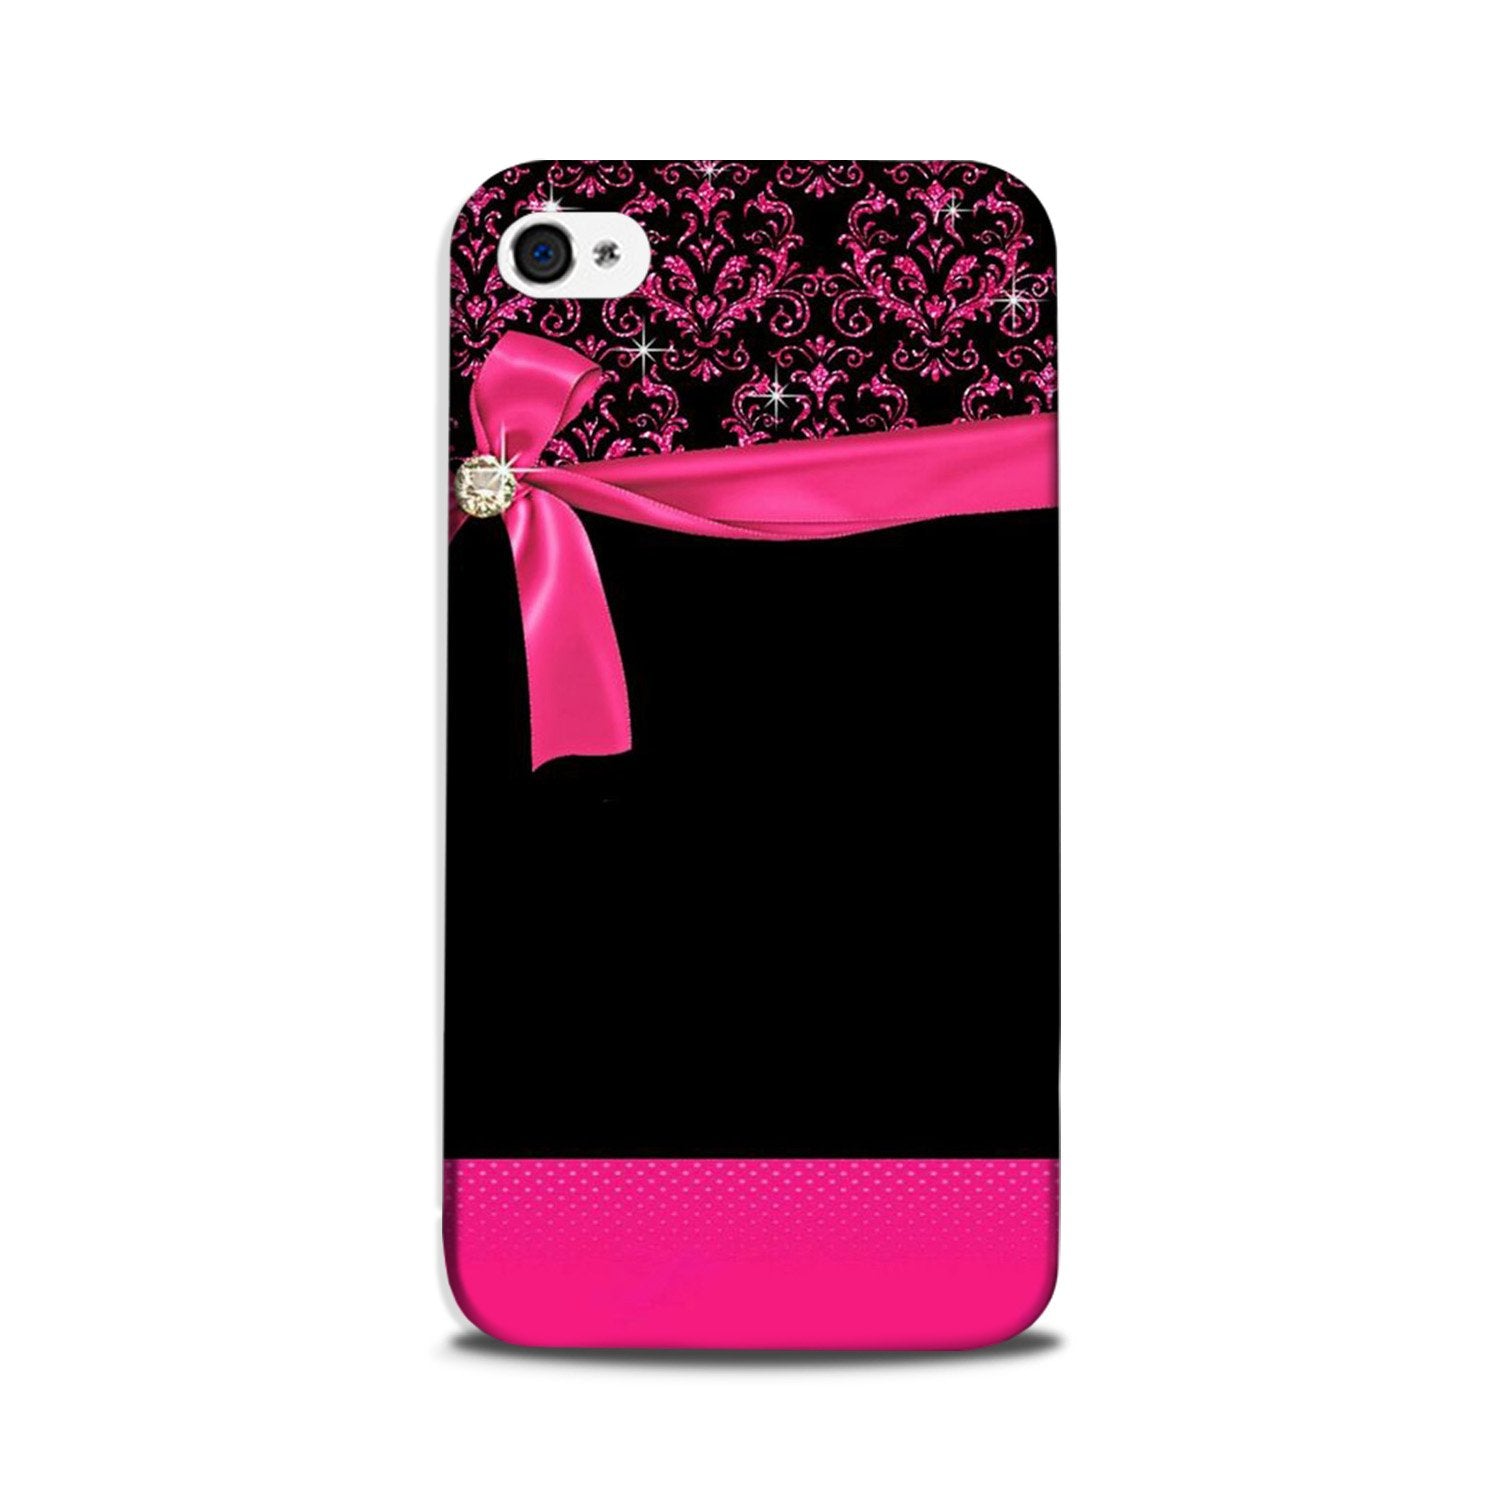 Gift Wrap4 Case for iPhone 5/ 5s